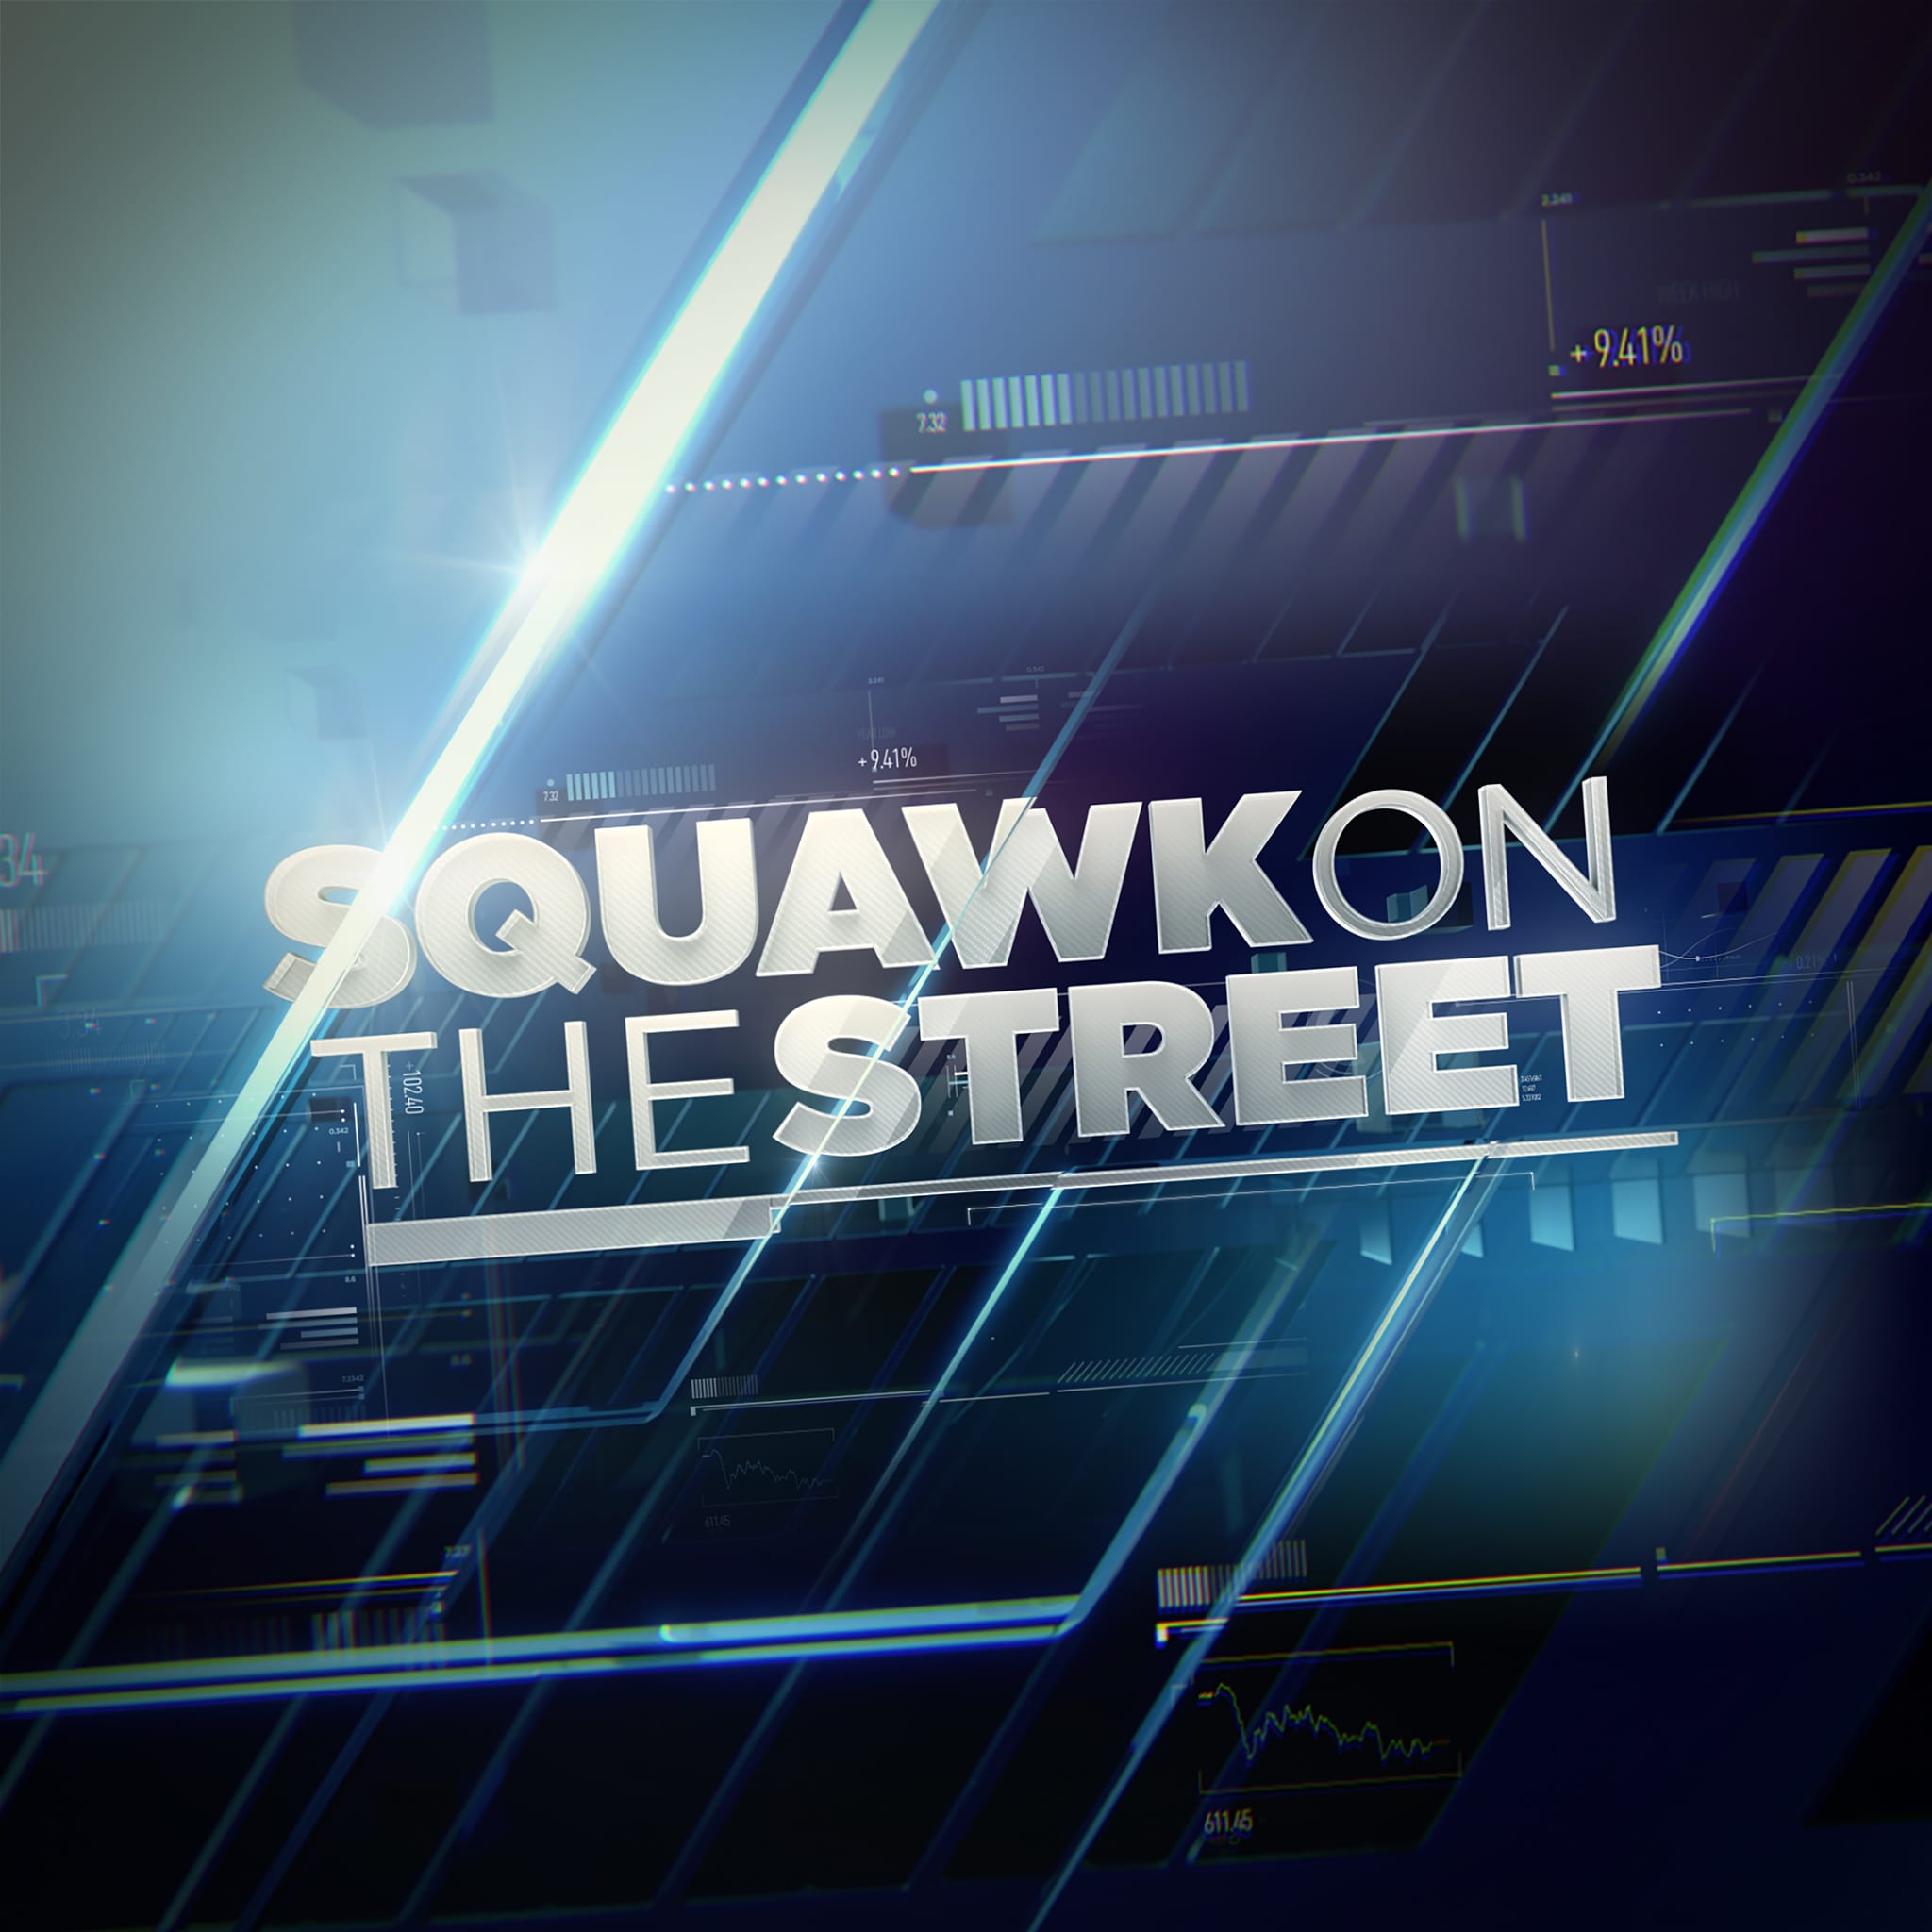 Advertise on “Squawk on the Street Podcast”